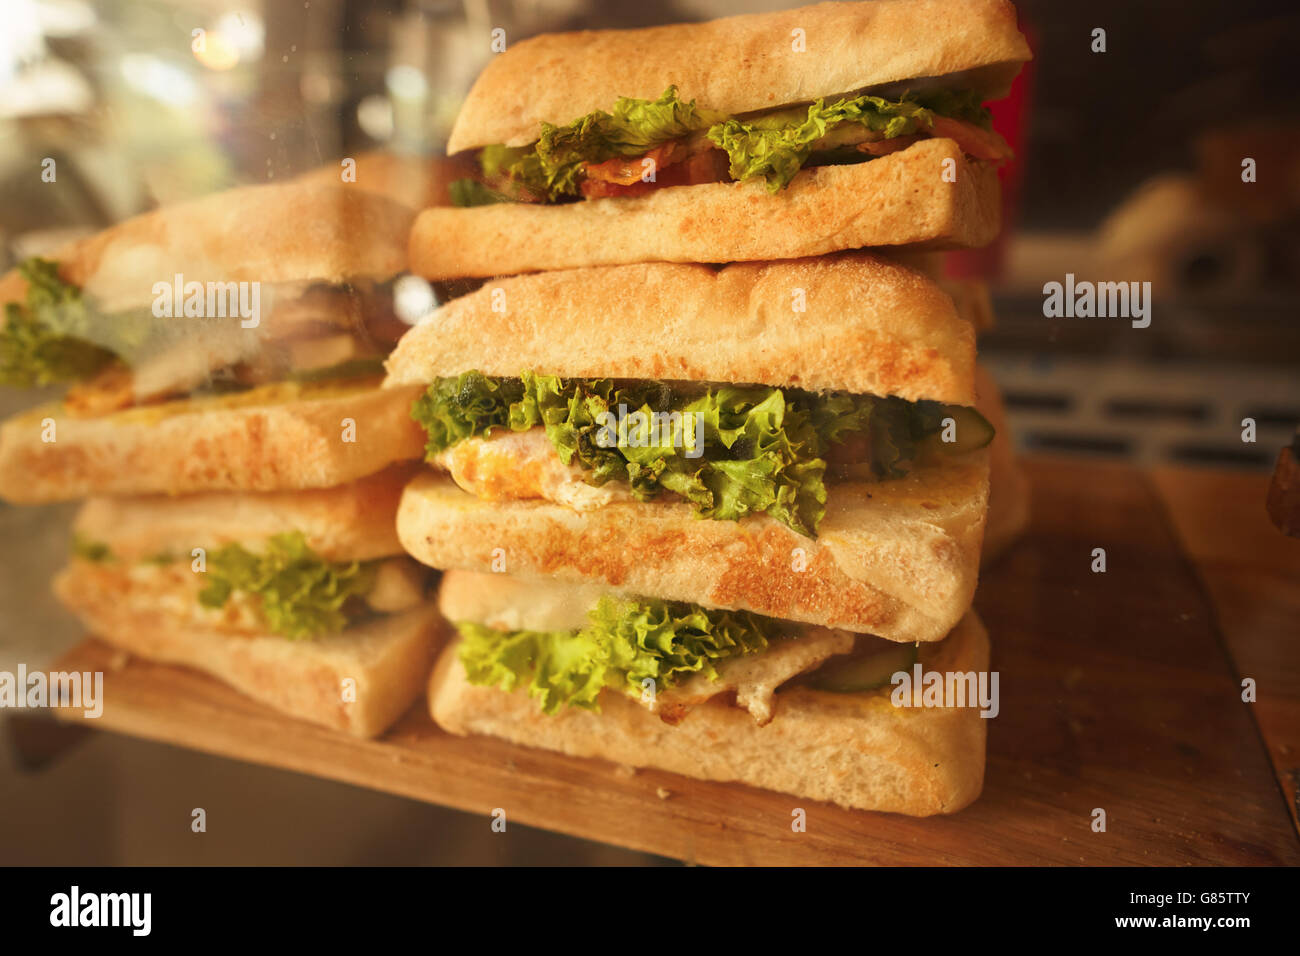 Sandwiches and snacks Stock Photo